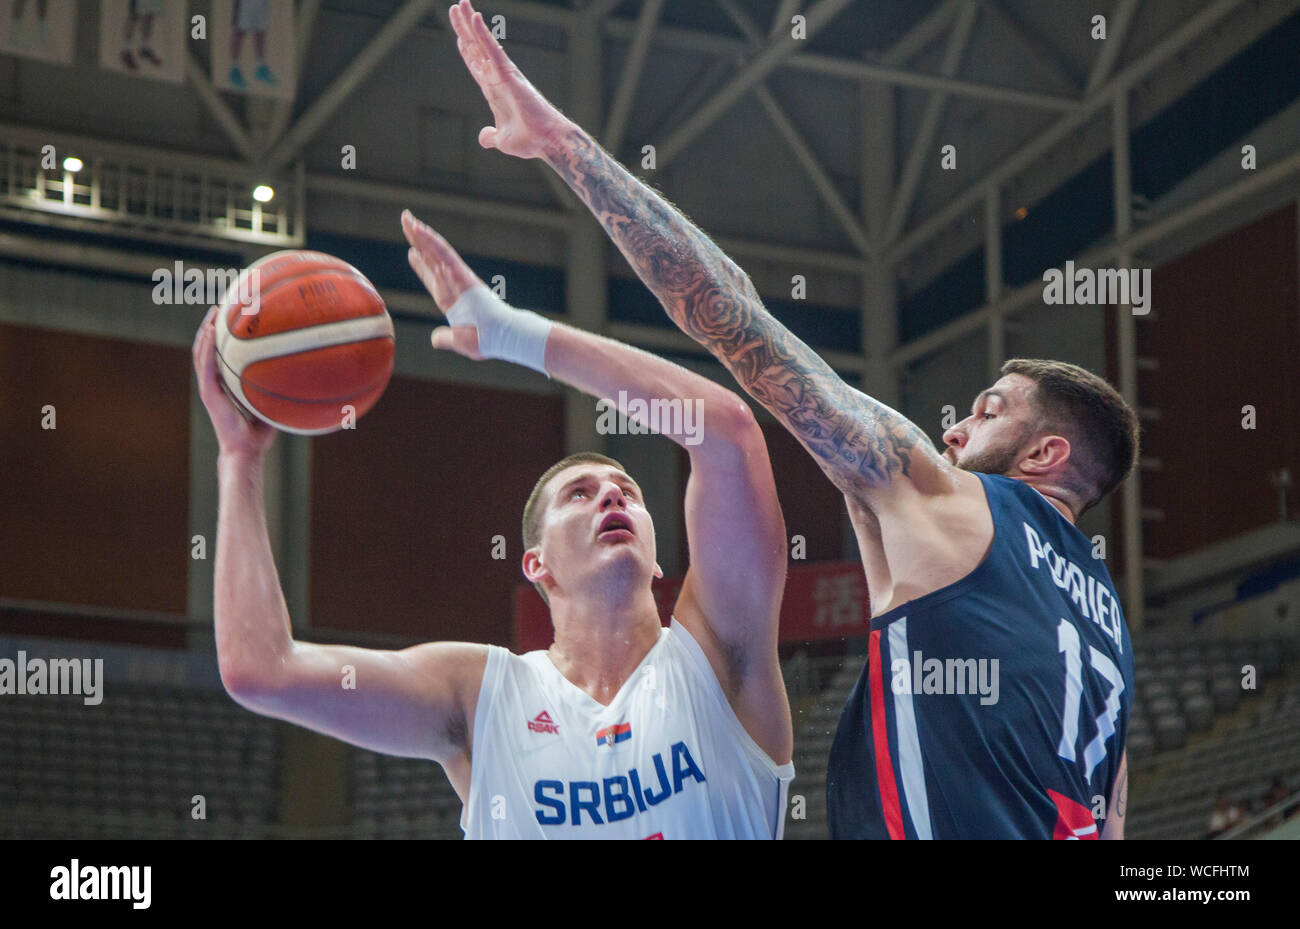 Nikola Jokic of Serbia, left, jumps for a lay-up during the final of 2019 International Basketball Championship against France in Shenyang city, northeast China's Liaoning province, 27 August 2019. Serbia defeated France with 61-56 at the final and wins the championship of 2019 Shenyang International Basketball Championship in Shenyang city, northeast China's Liaoning province, 27 August 2019. Stock Photo